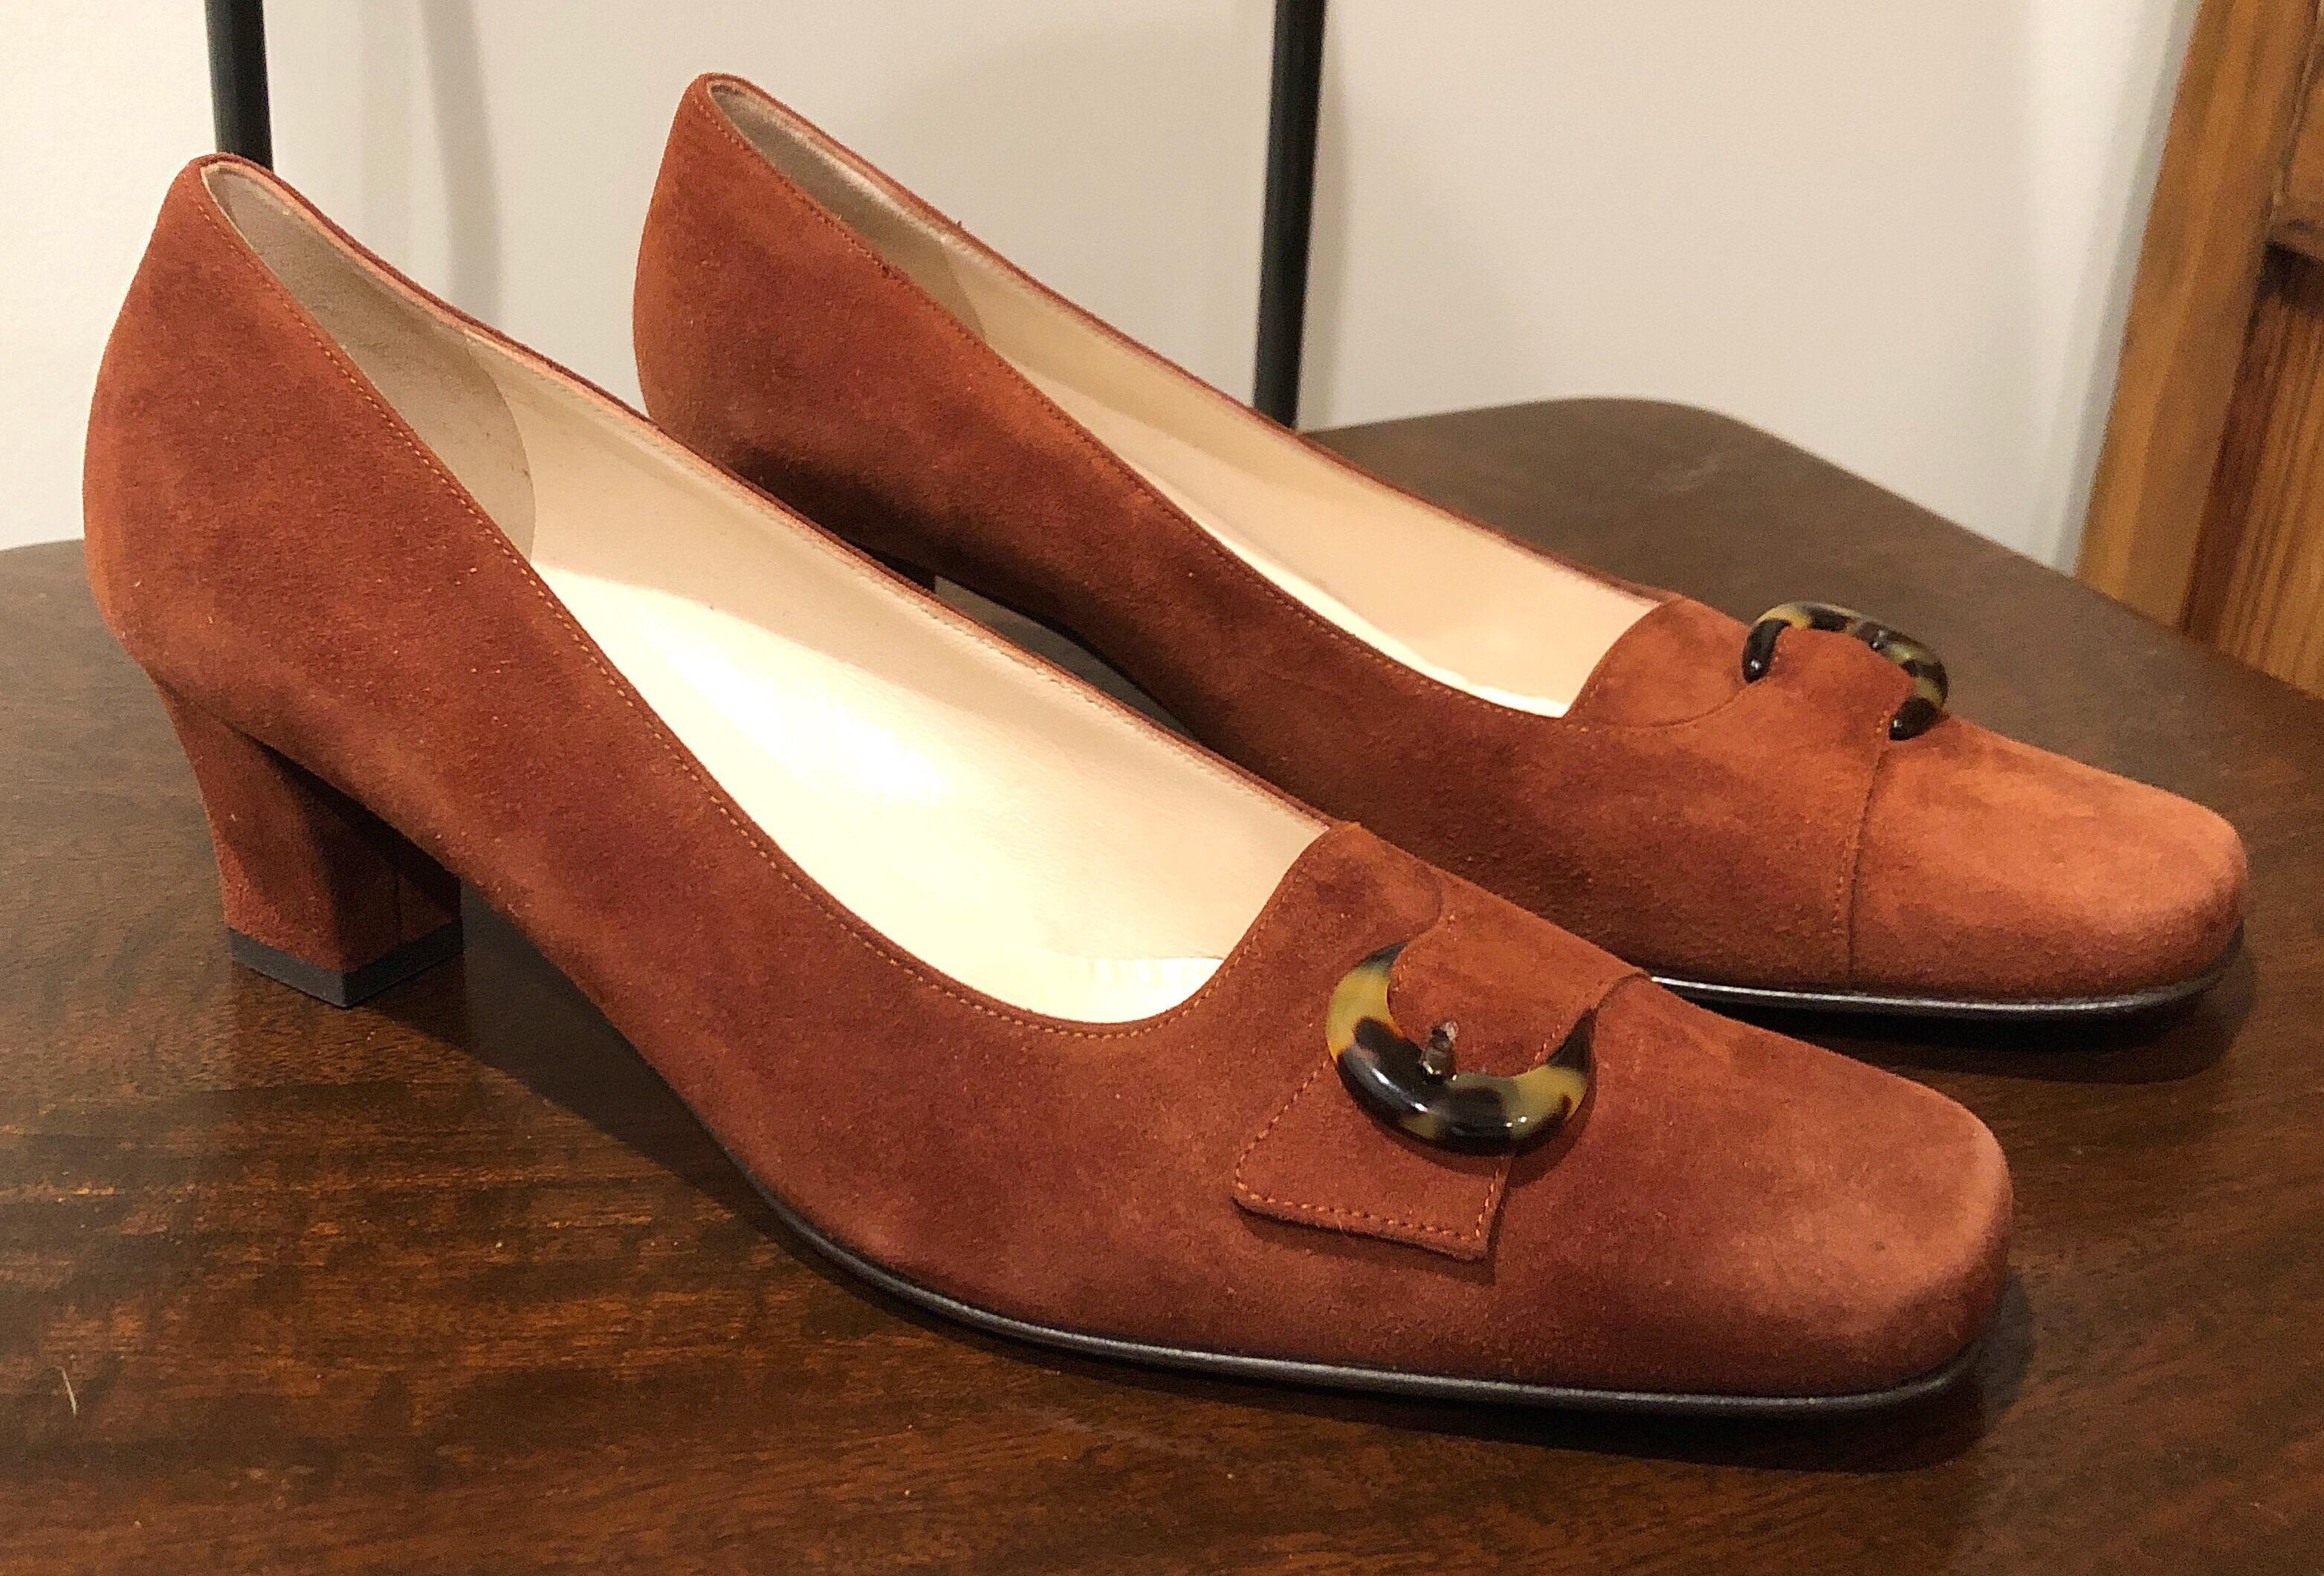 Chic brand new, never worn vintage 90s 
SALVATORE FERRAGAMO light brown / rust suede leather size 6.5 low heels / pumps! Features a faux tortoise shell buckle on each shoe. Super comftorable , with a durable sensible heel. Can easily be dressed up